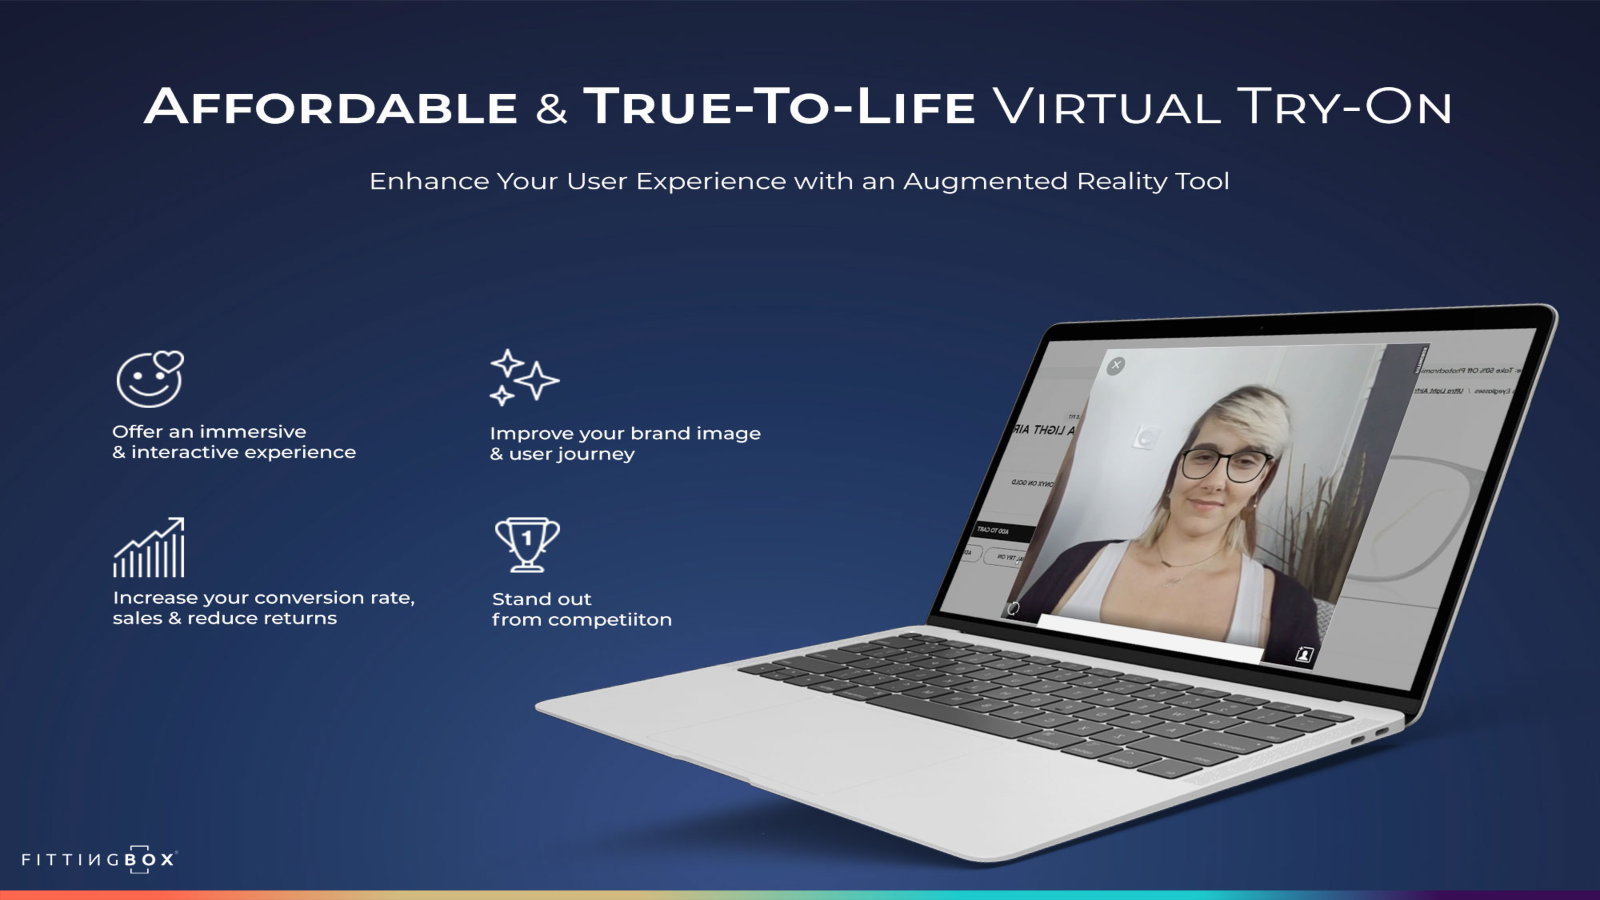 AFFORDABLE AND TRUE-TO-LIFE VIRTUAL TRY-ON